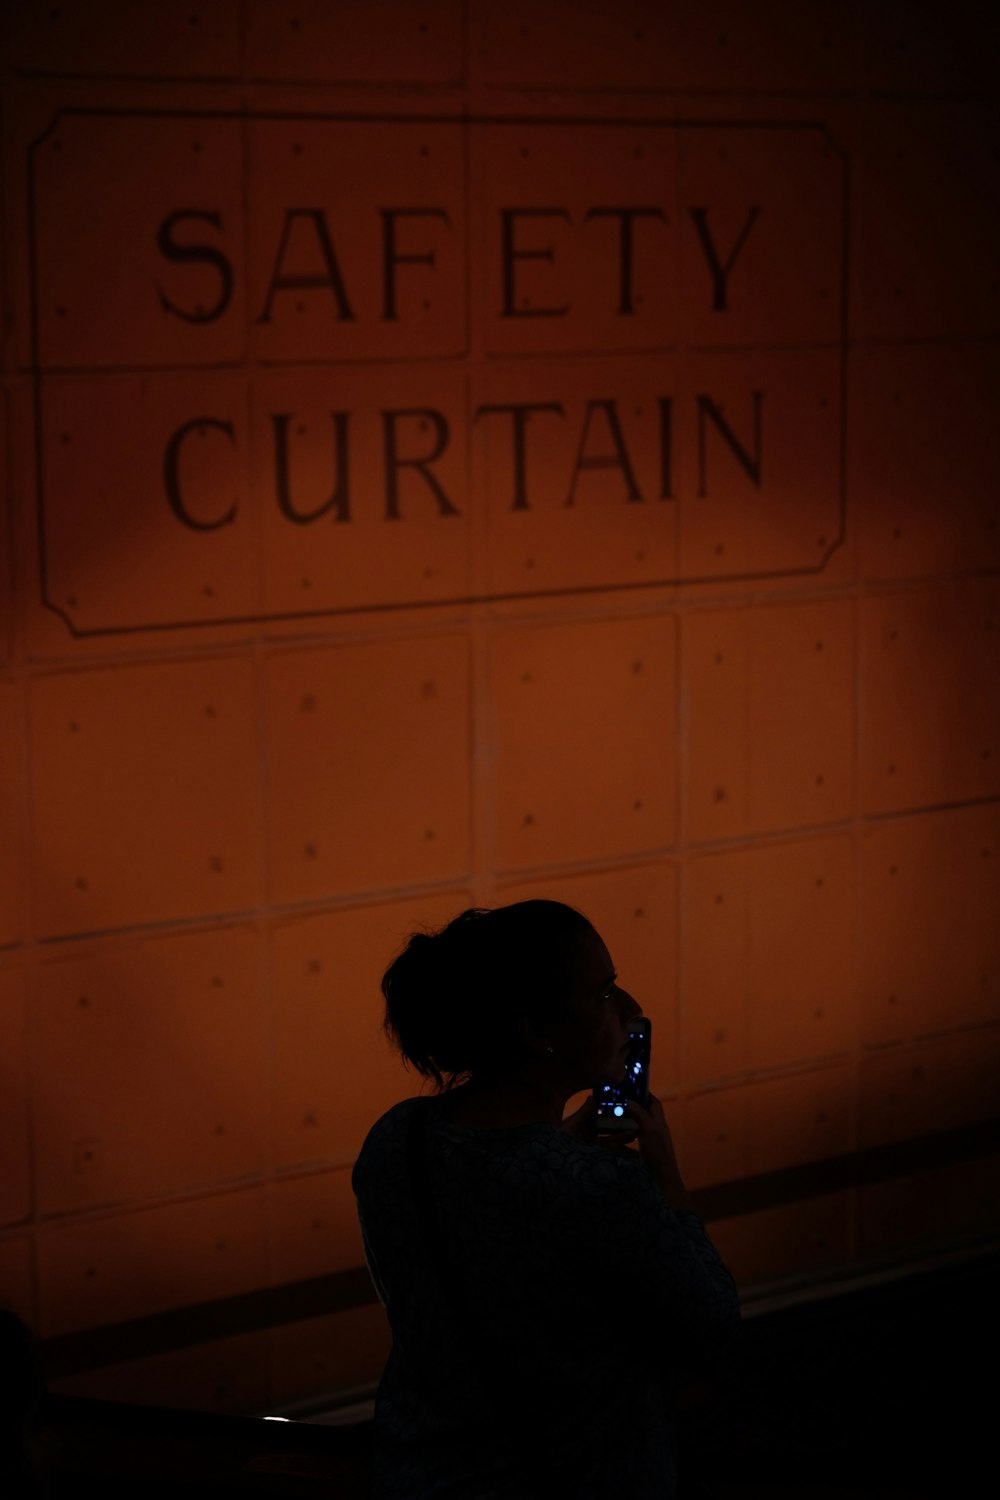 Safety Curtain sign during night time